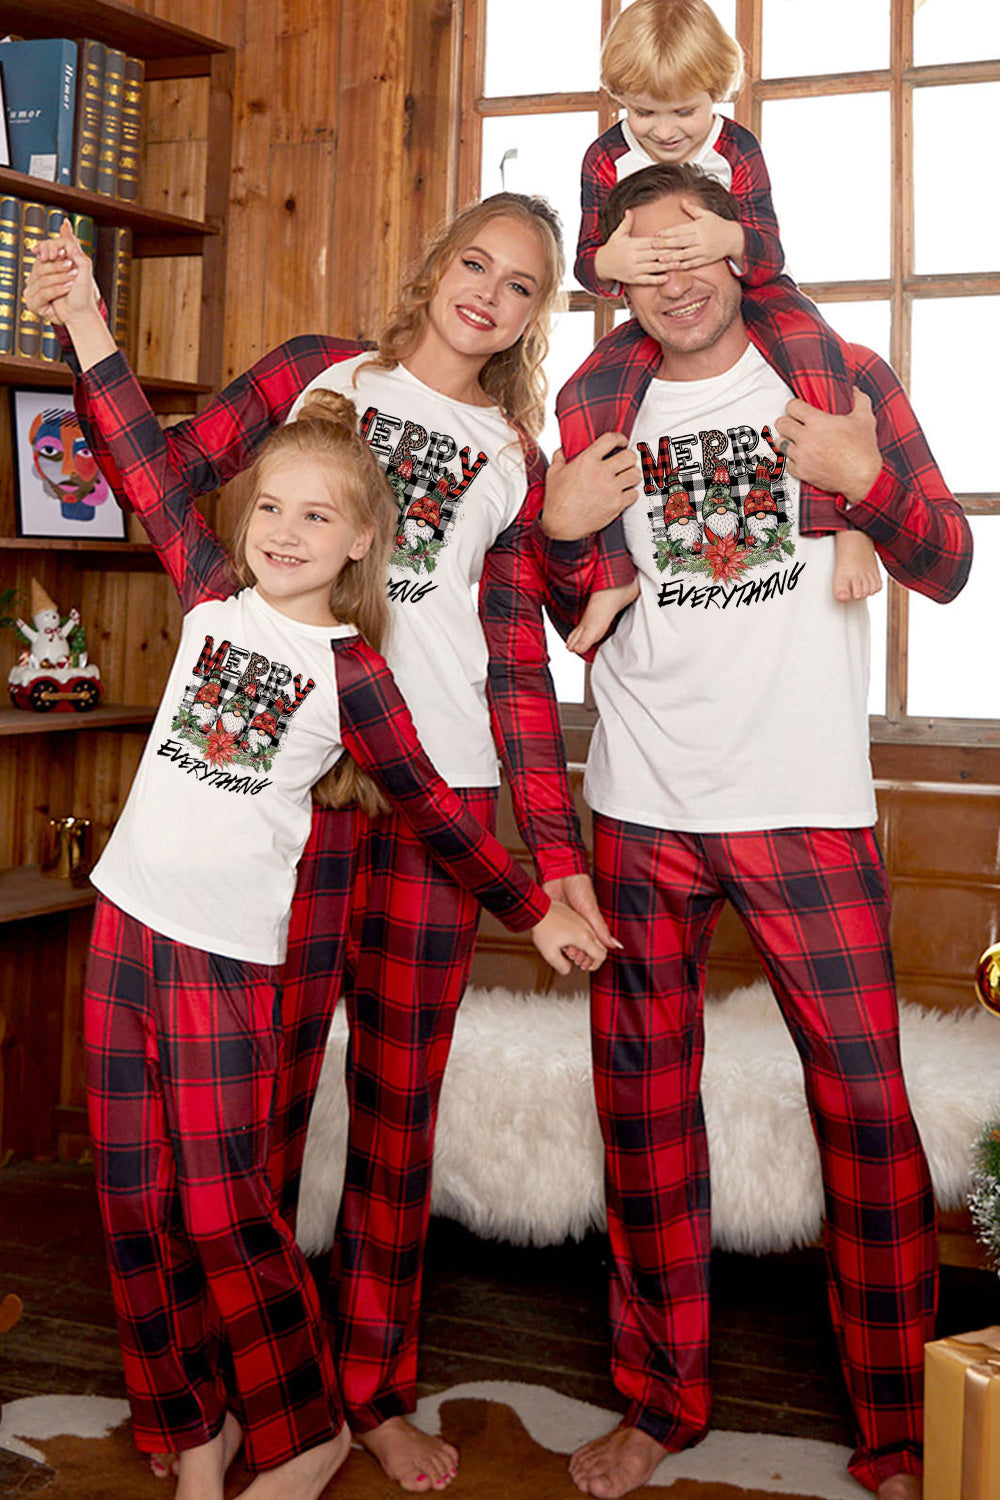 MERRY EVERYTHING Graphic Top and Plaid Pants Set